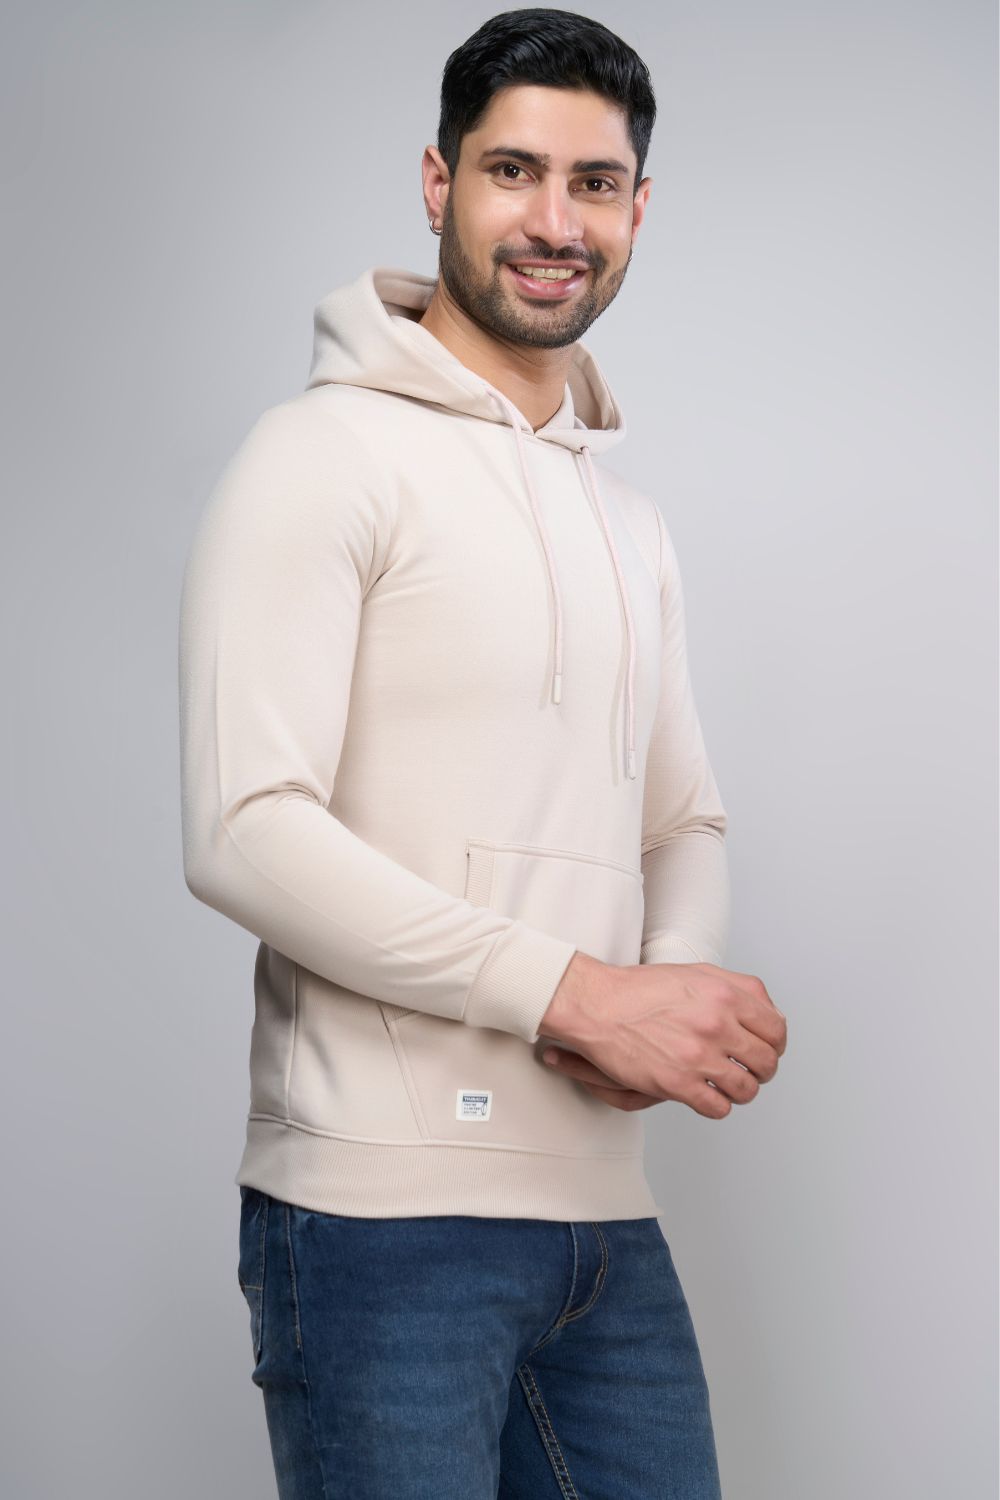 Soft Beige colored, hoodie for men with full sleeves and relaxed fit, side view.